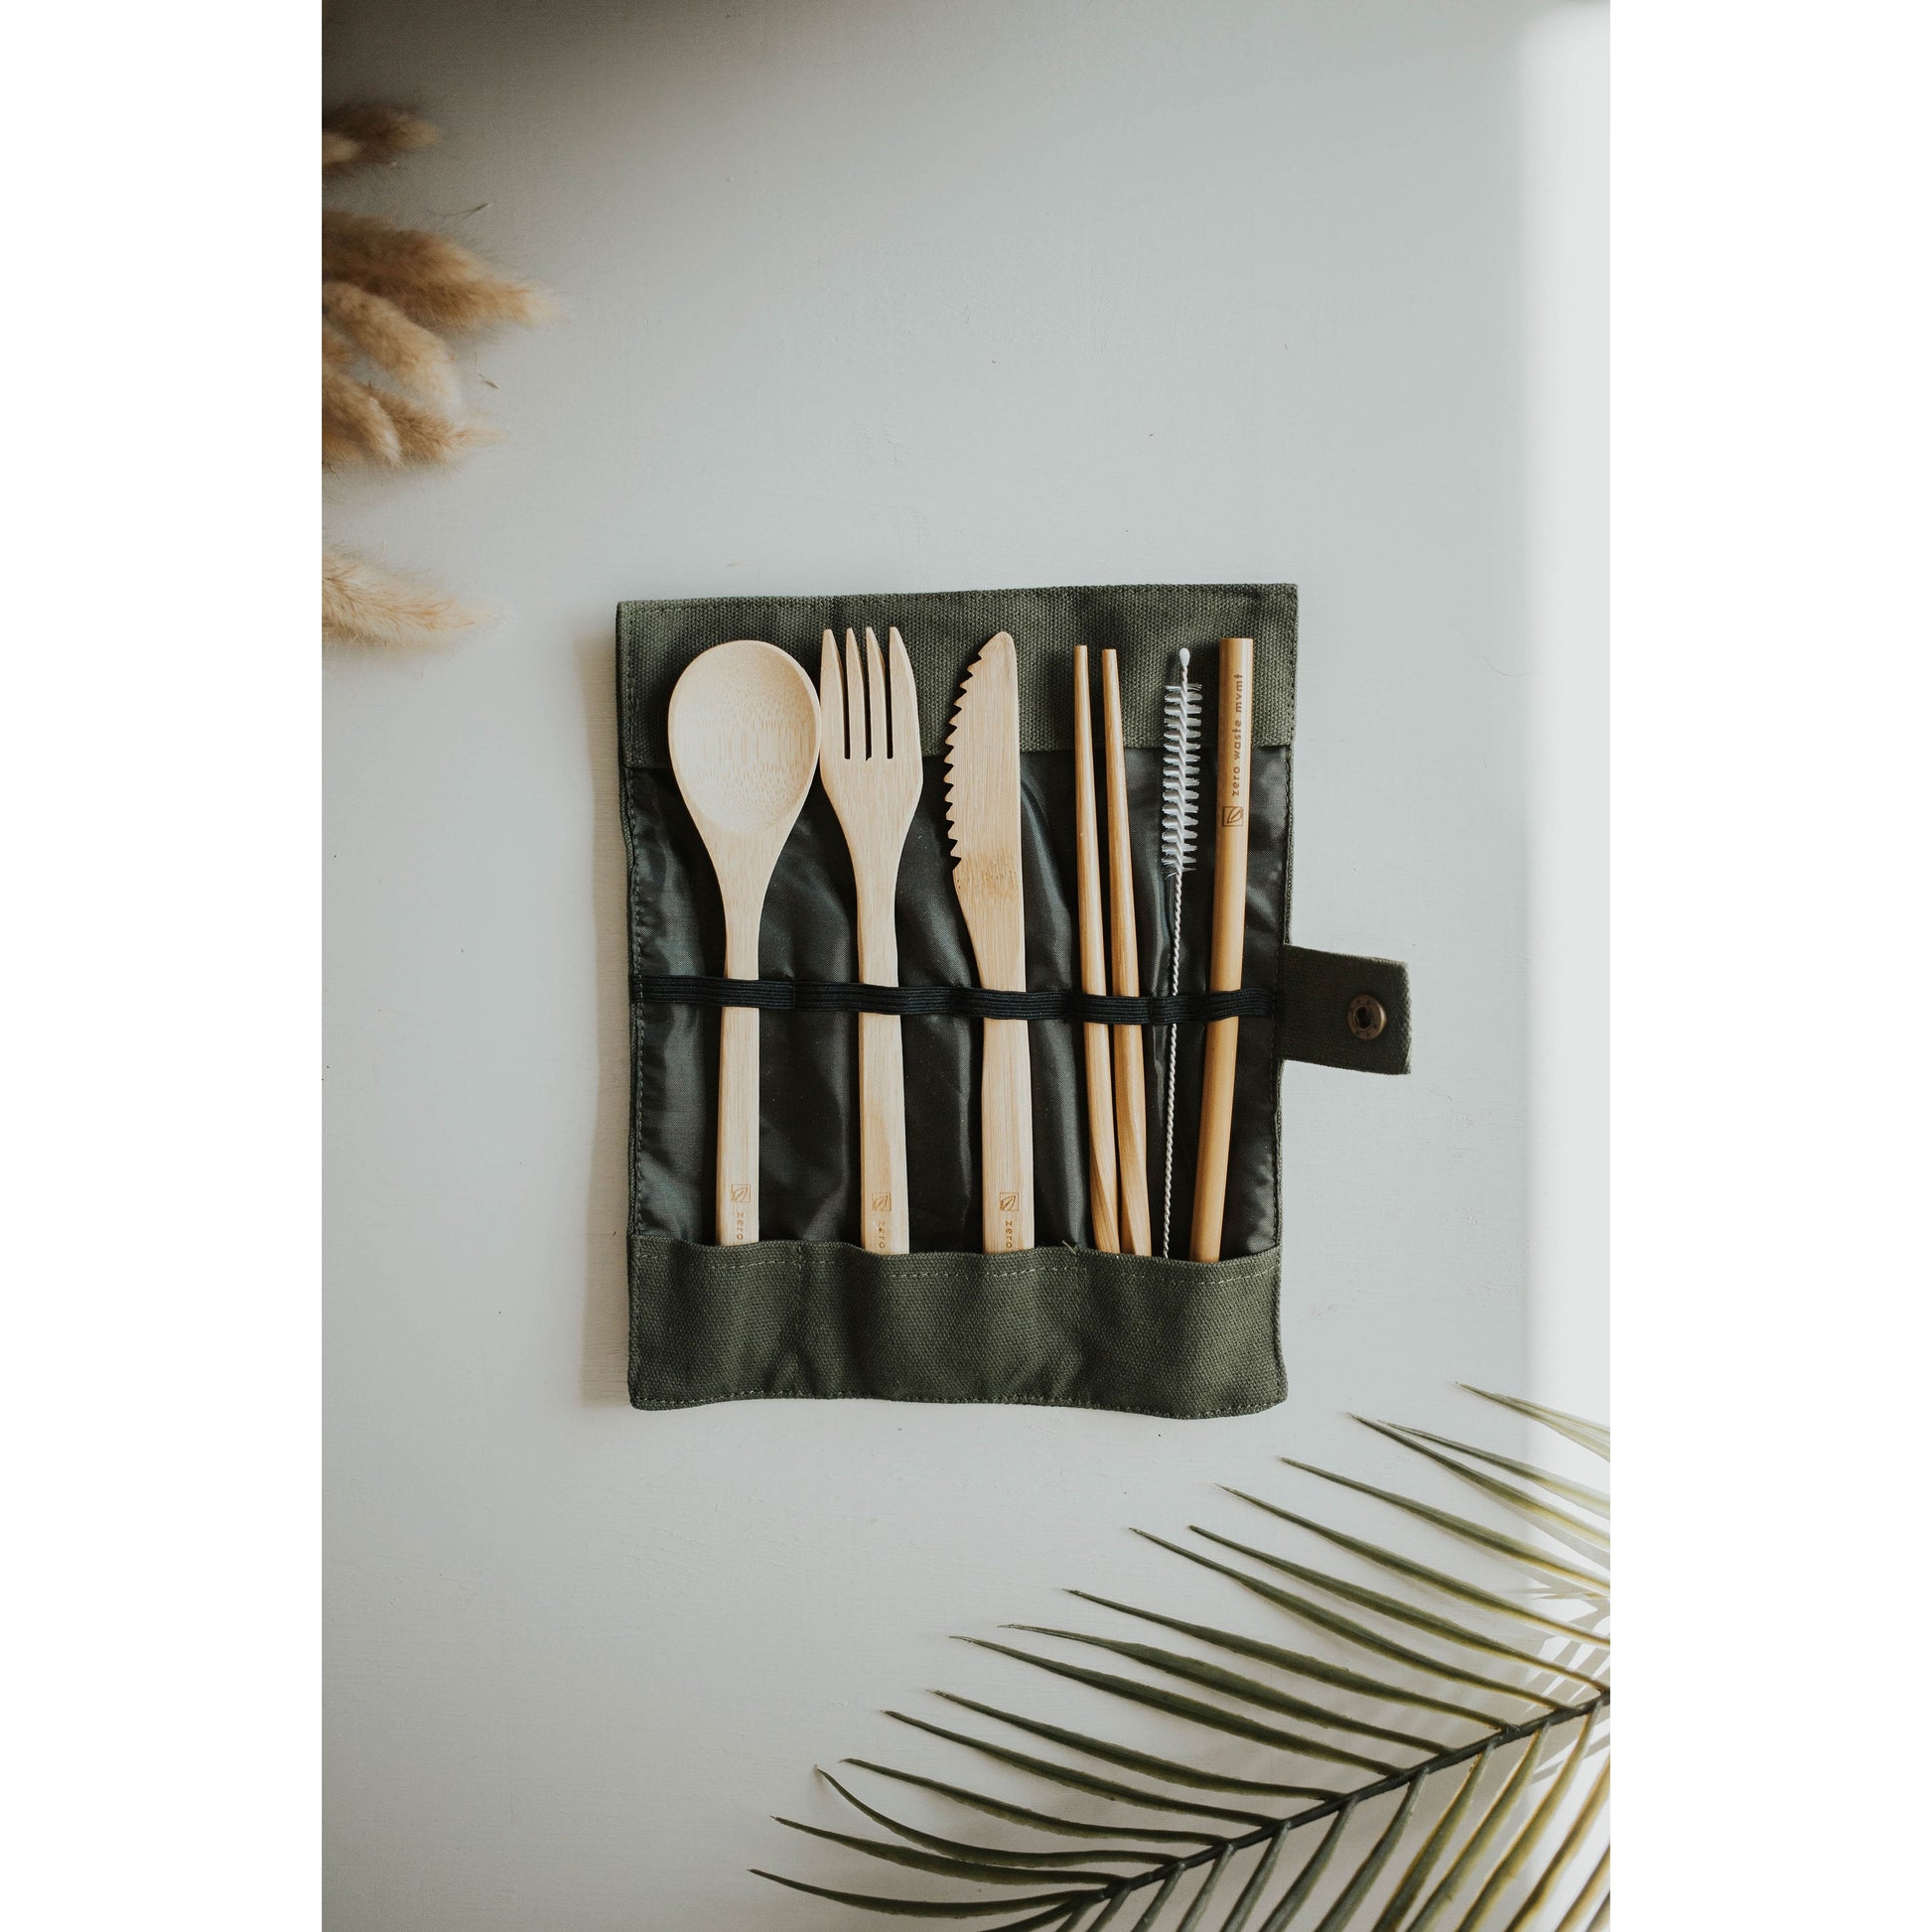 Zero Waste Mvmt Travel Bamboo Utensil Set sold at Thread Spun. All-natural, eco-friendly, biodegradable bamboo cutlery set including fork, spoon, knife, chopsticks and a straw + cleaner brush. It is the perfect size to keep in your car, purse, backpack, or lunchbox! 